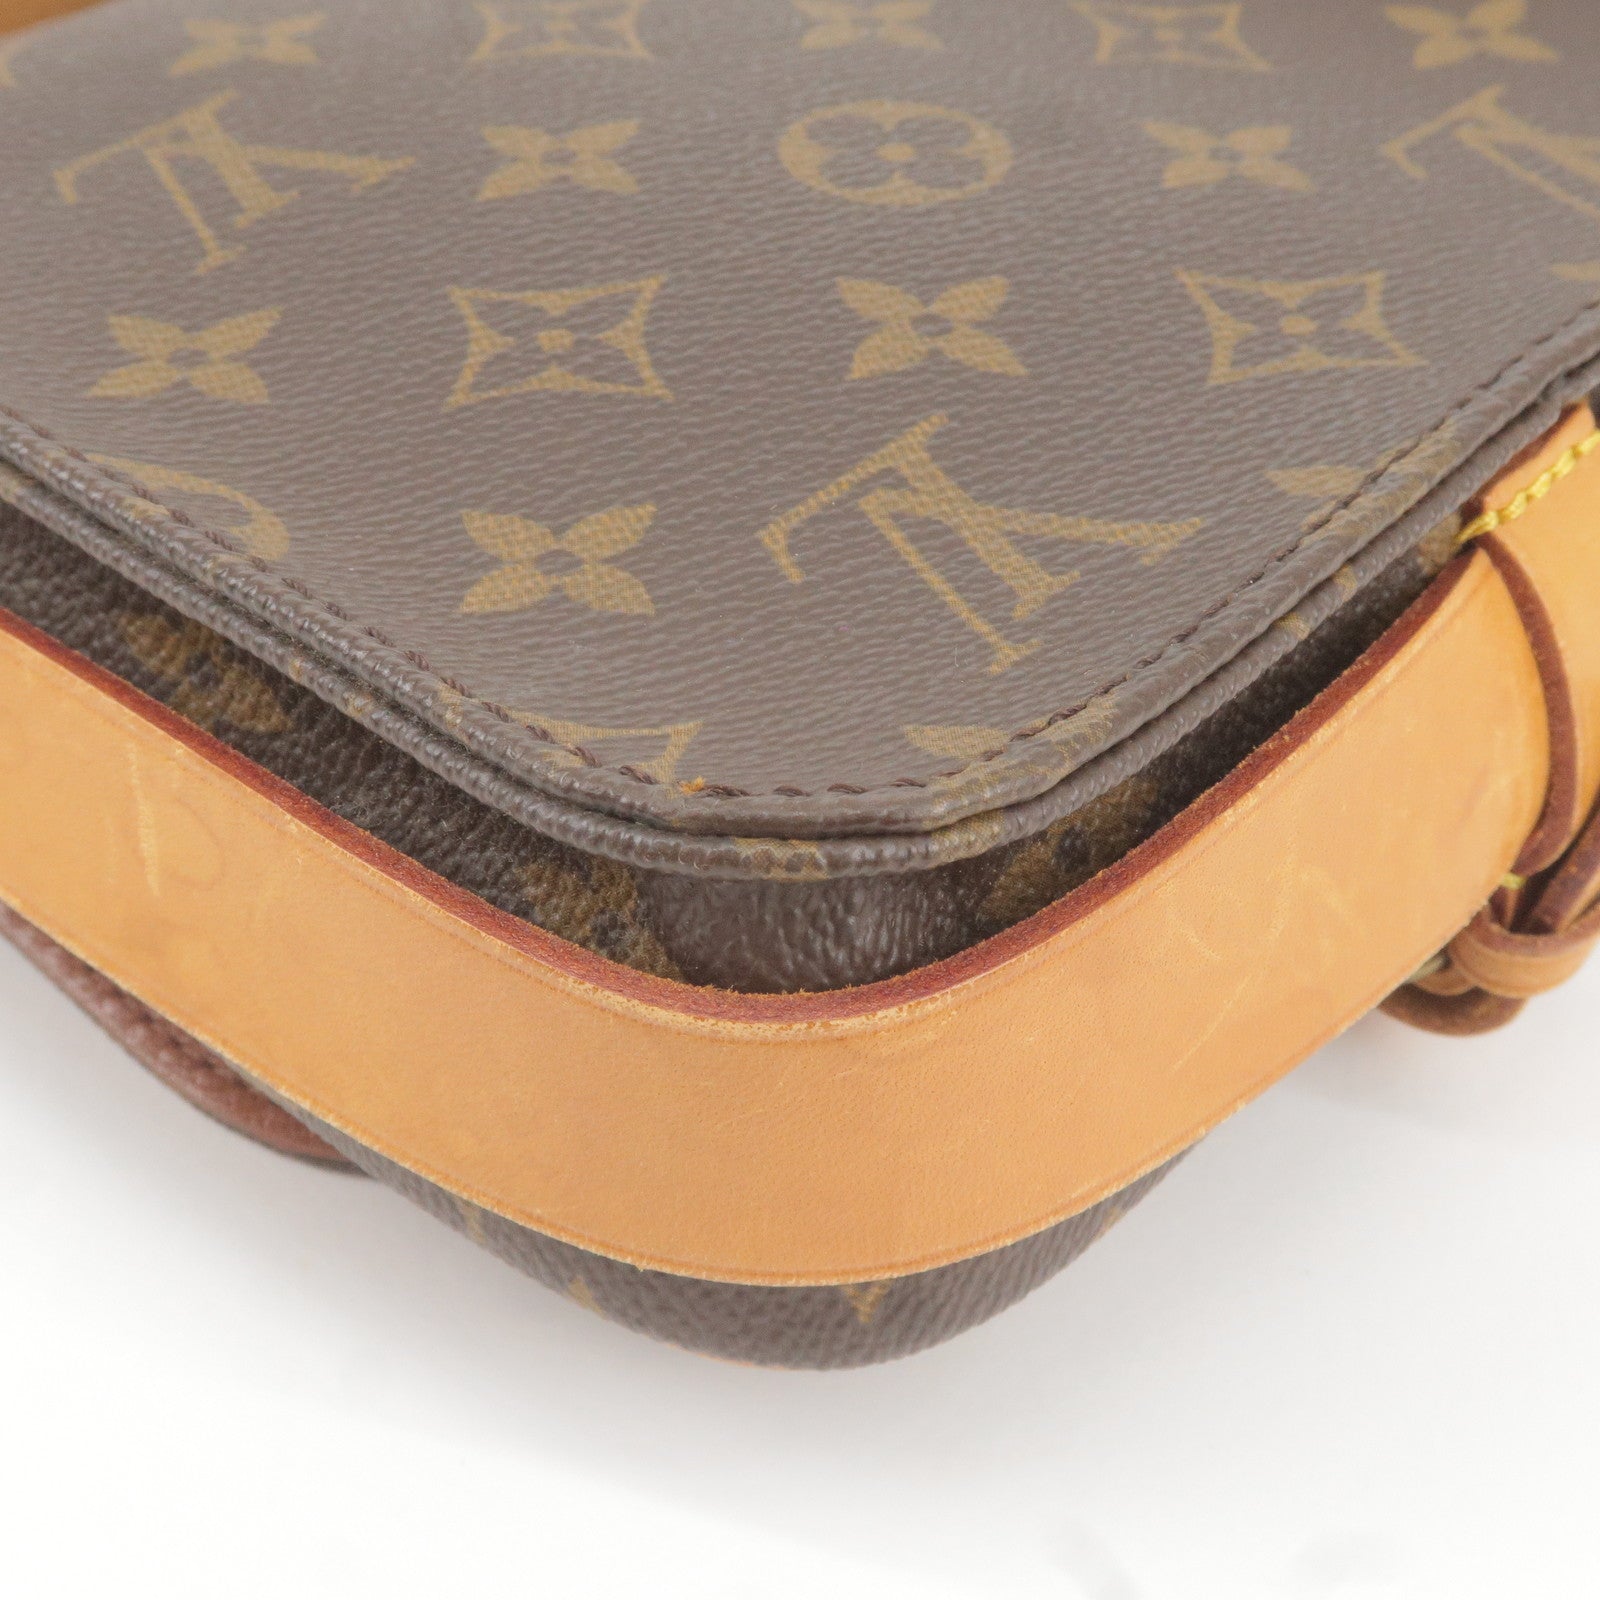 Louis Vuitton Sold Out Brand New Monogram Soft Trunk Messenger PM